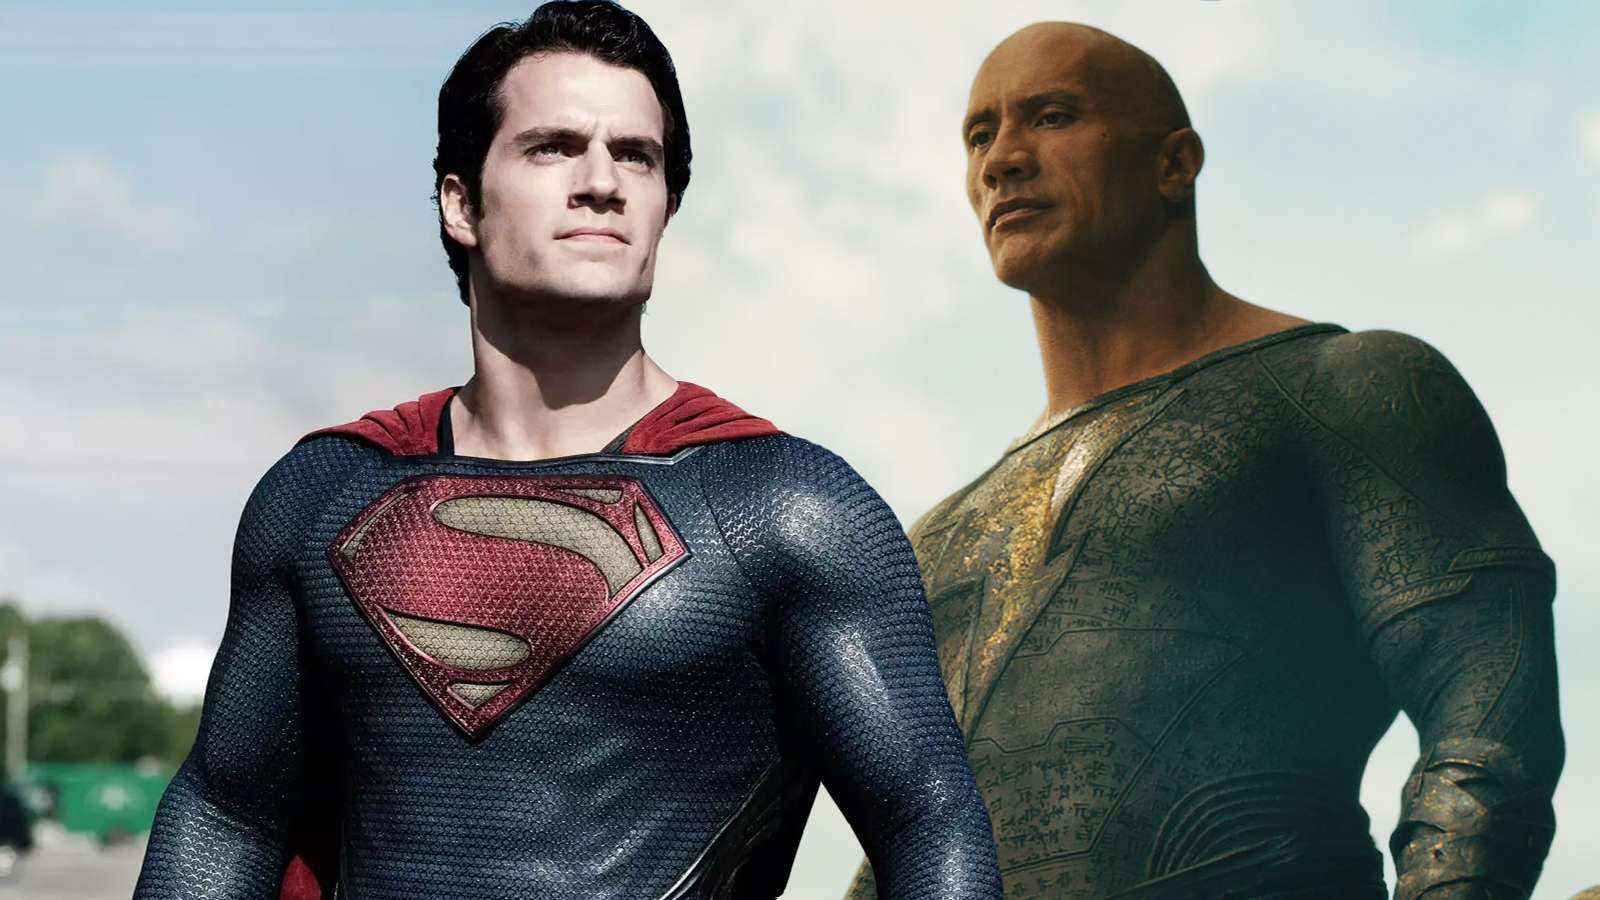 An image of Henry Cavill's Superman and The Rock's Black Adam